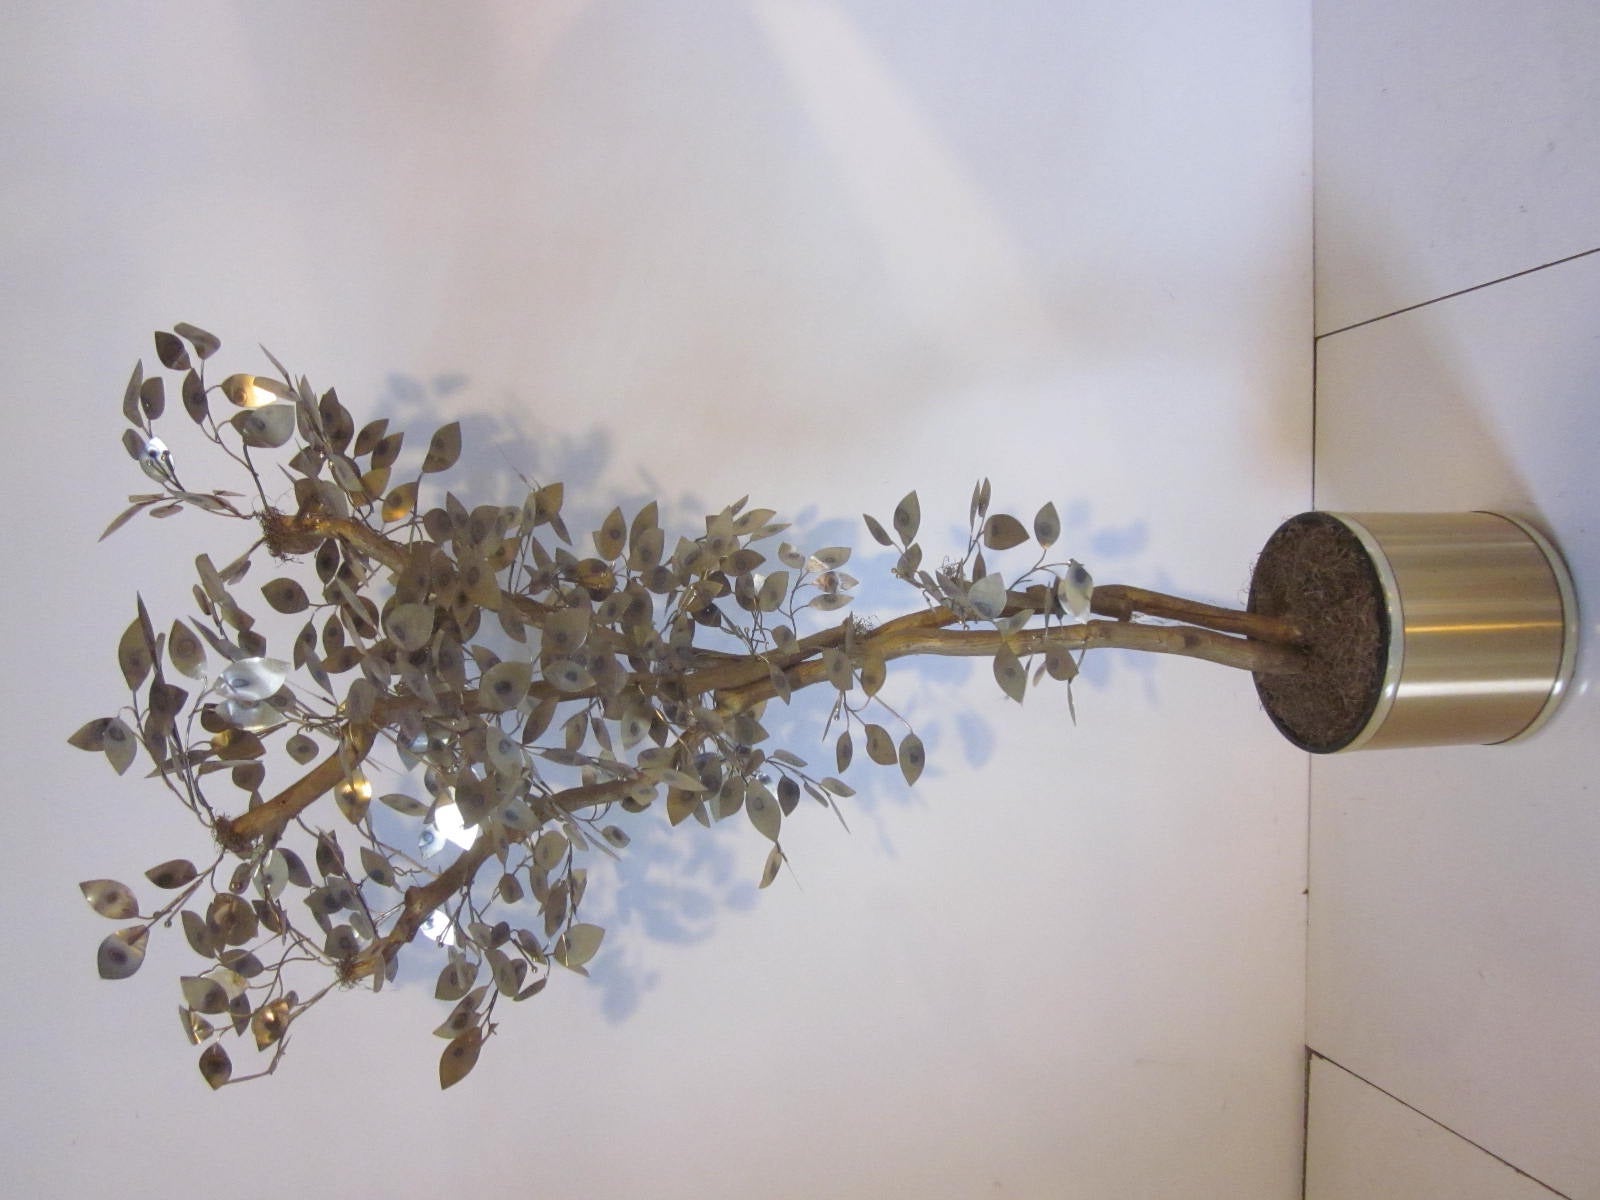 A Jere tree sculpture with brass metal flamed patinated leaves and stems mounted on a gilded natural wooden tree trunk sitting in a brushed brass planter with plastic insert.